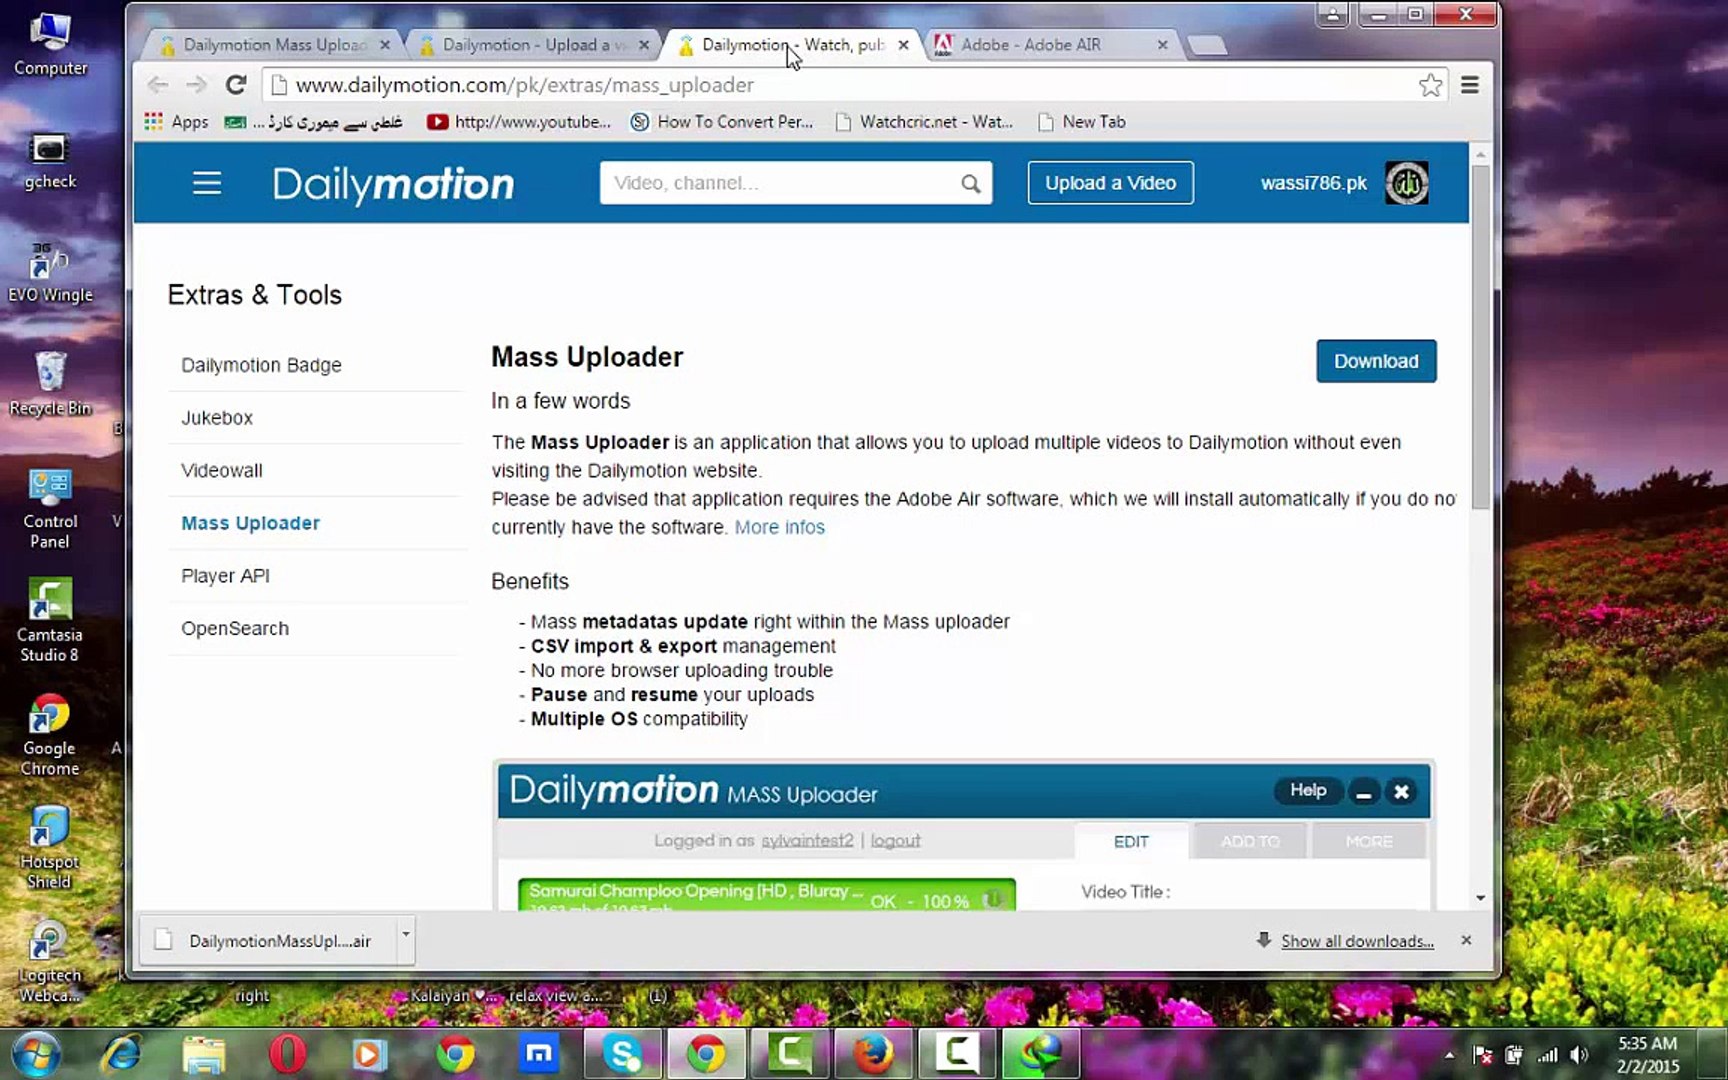 How To Download & Install Dailymotion Mass Uploader - Video Dailymotion